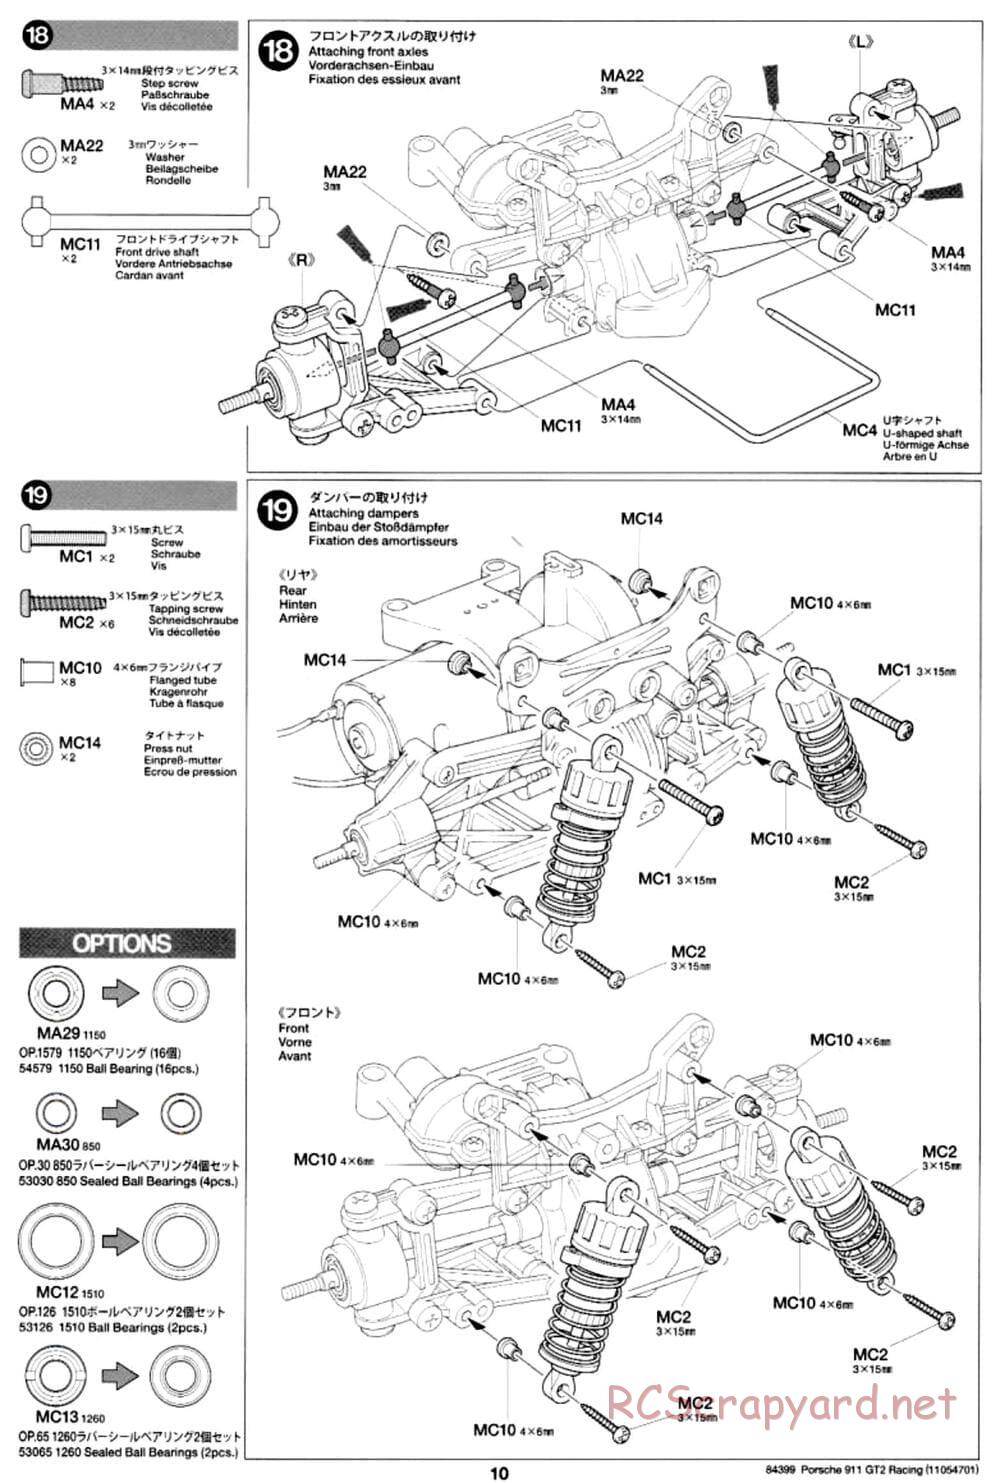 Tamiya - Porsche 911 GT2 Racing - TA02SW Chassis - Manual - Page 10